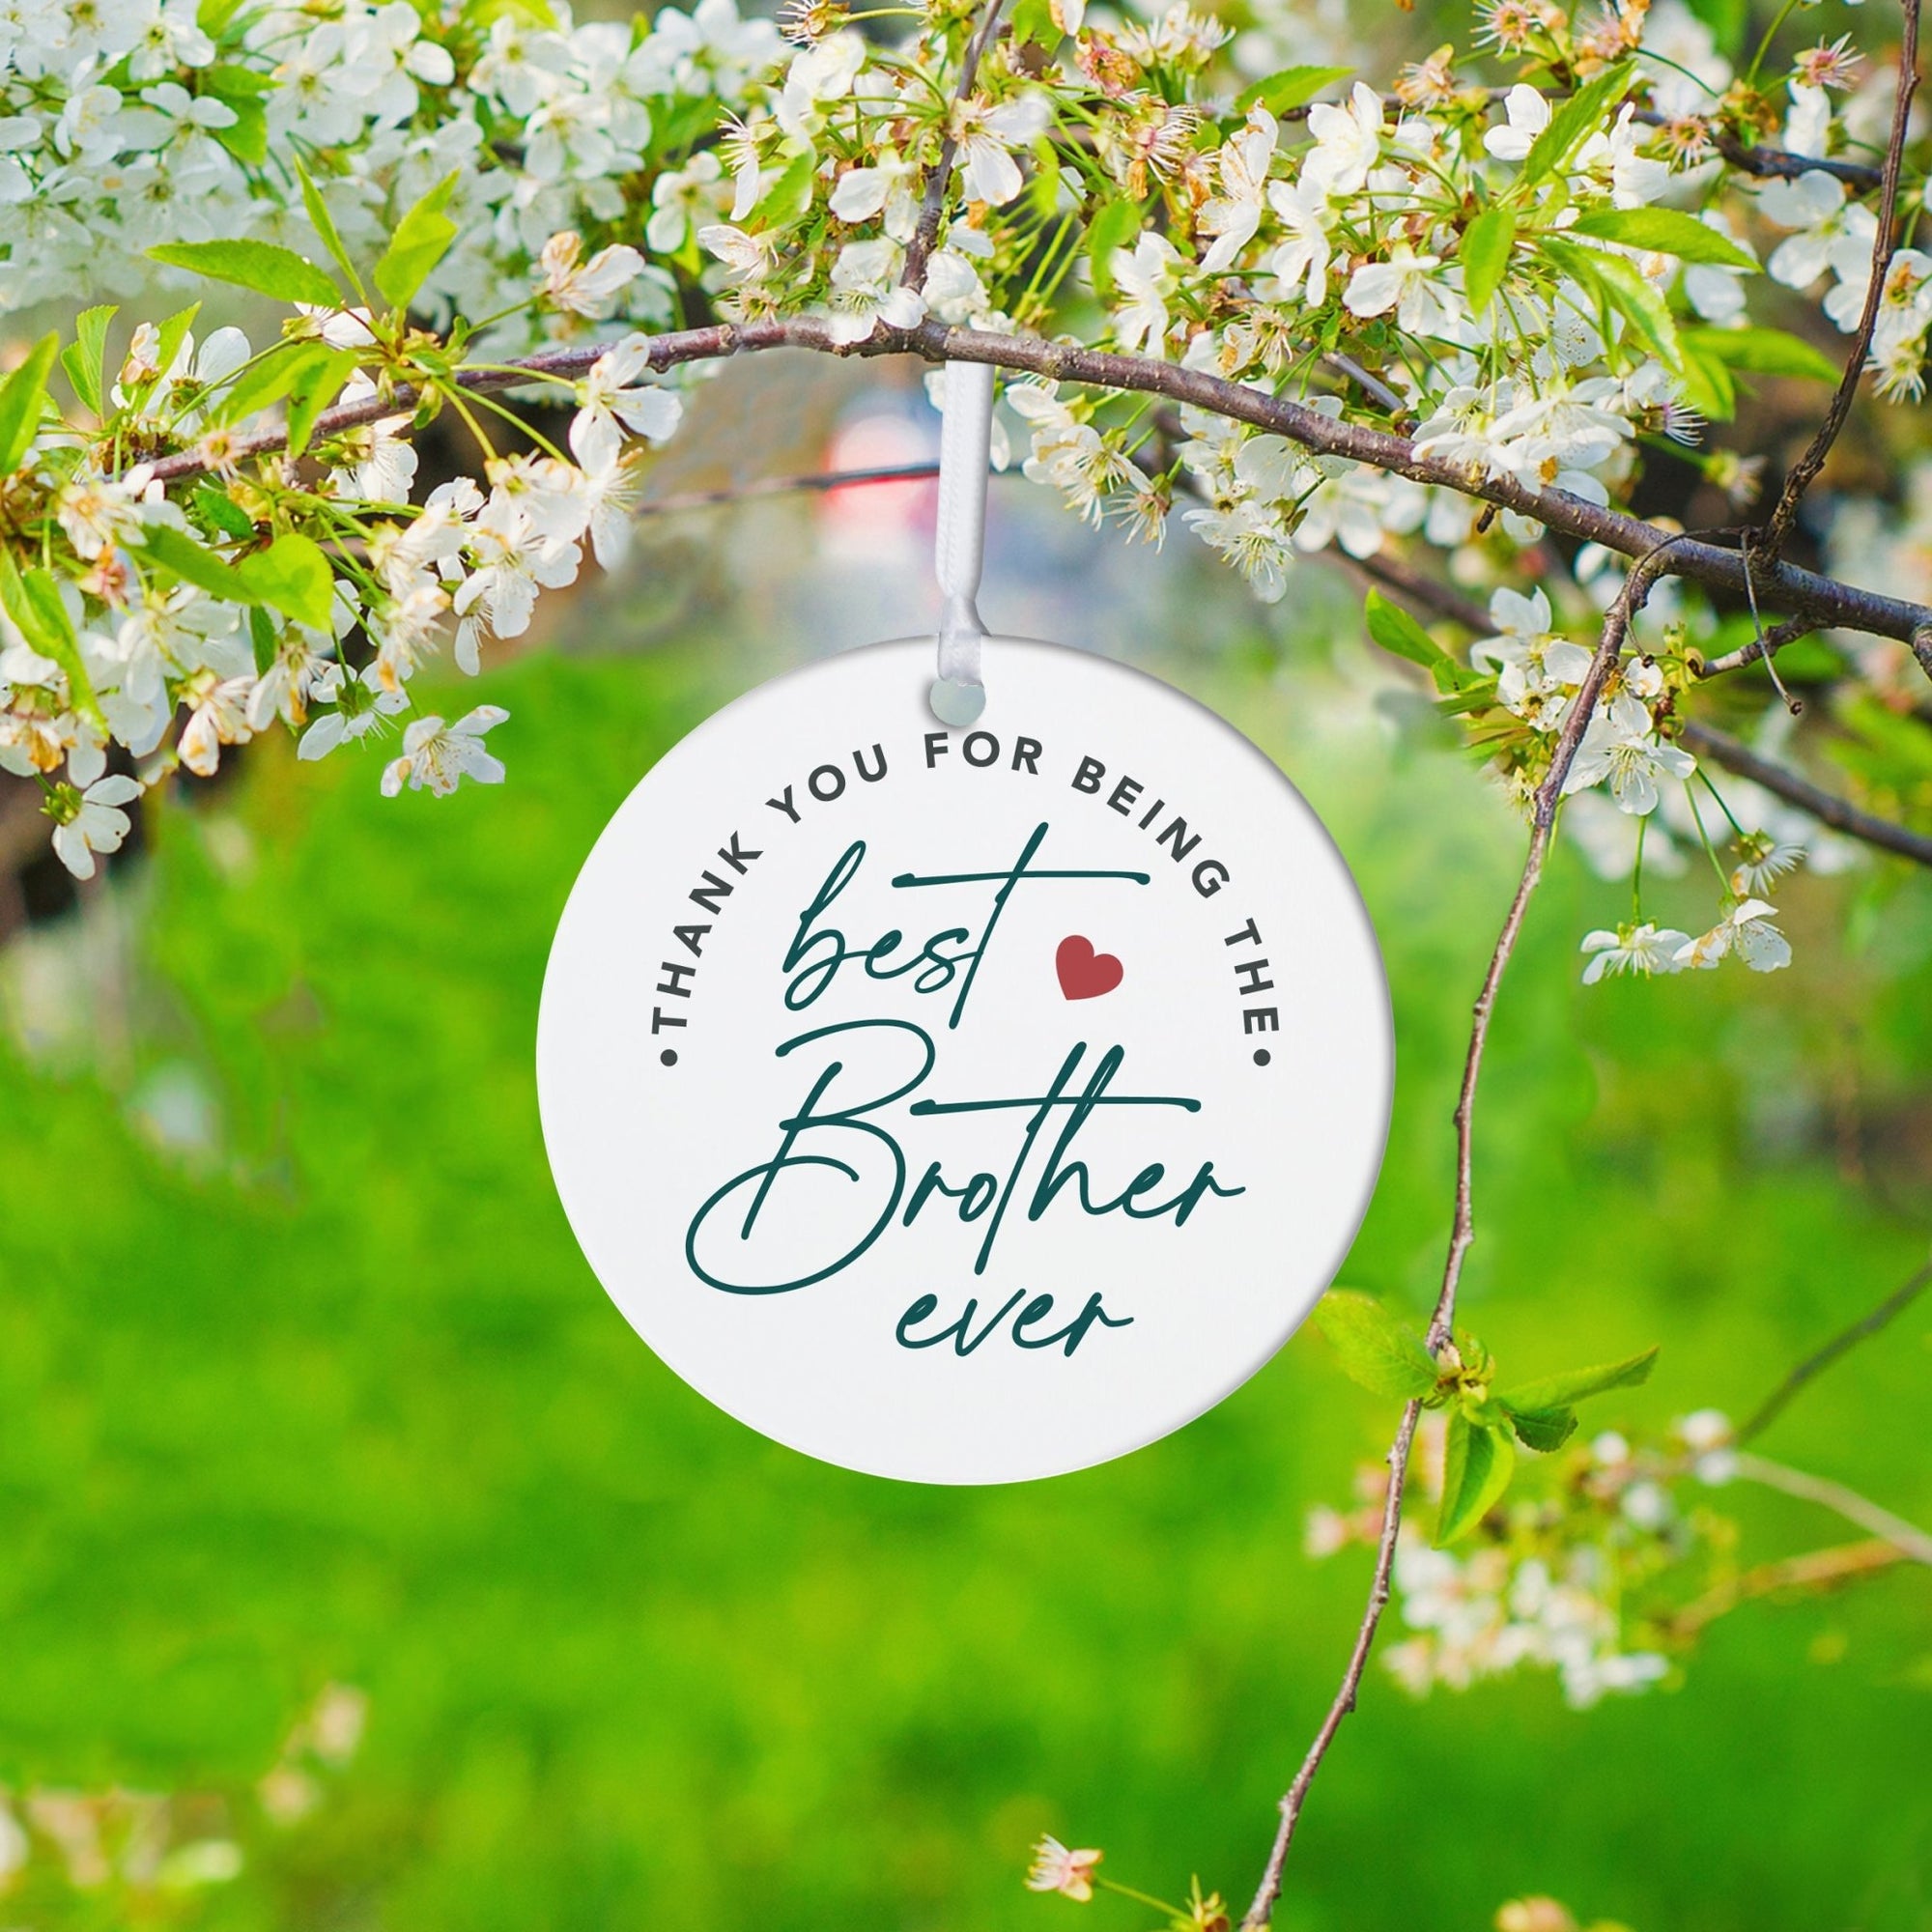 Brothers White Ornament With Inspirational Gift Ideas - Thank You For Being The Best Brother Ever - LifeSong Milestones